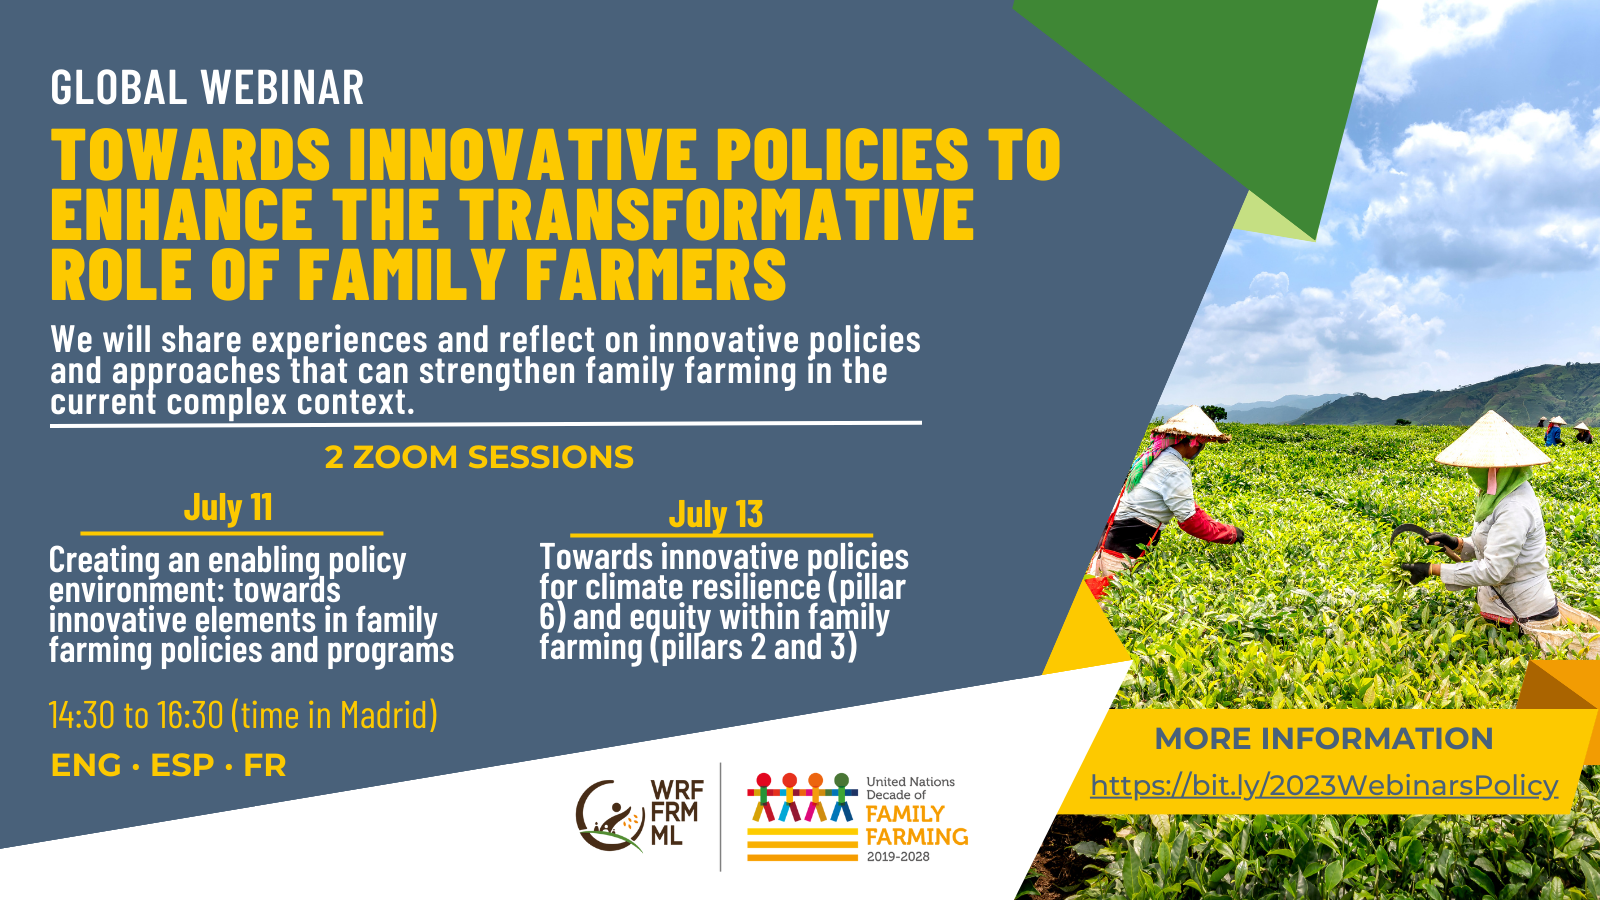 TOWARDS INNOVATIVE POLICIES TO ENHANCE THE TRANSFORMATIVE ROLE OF FAMILY FARMERS